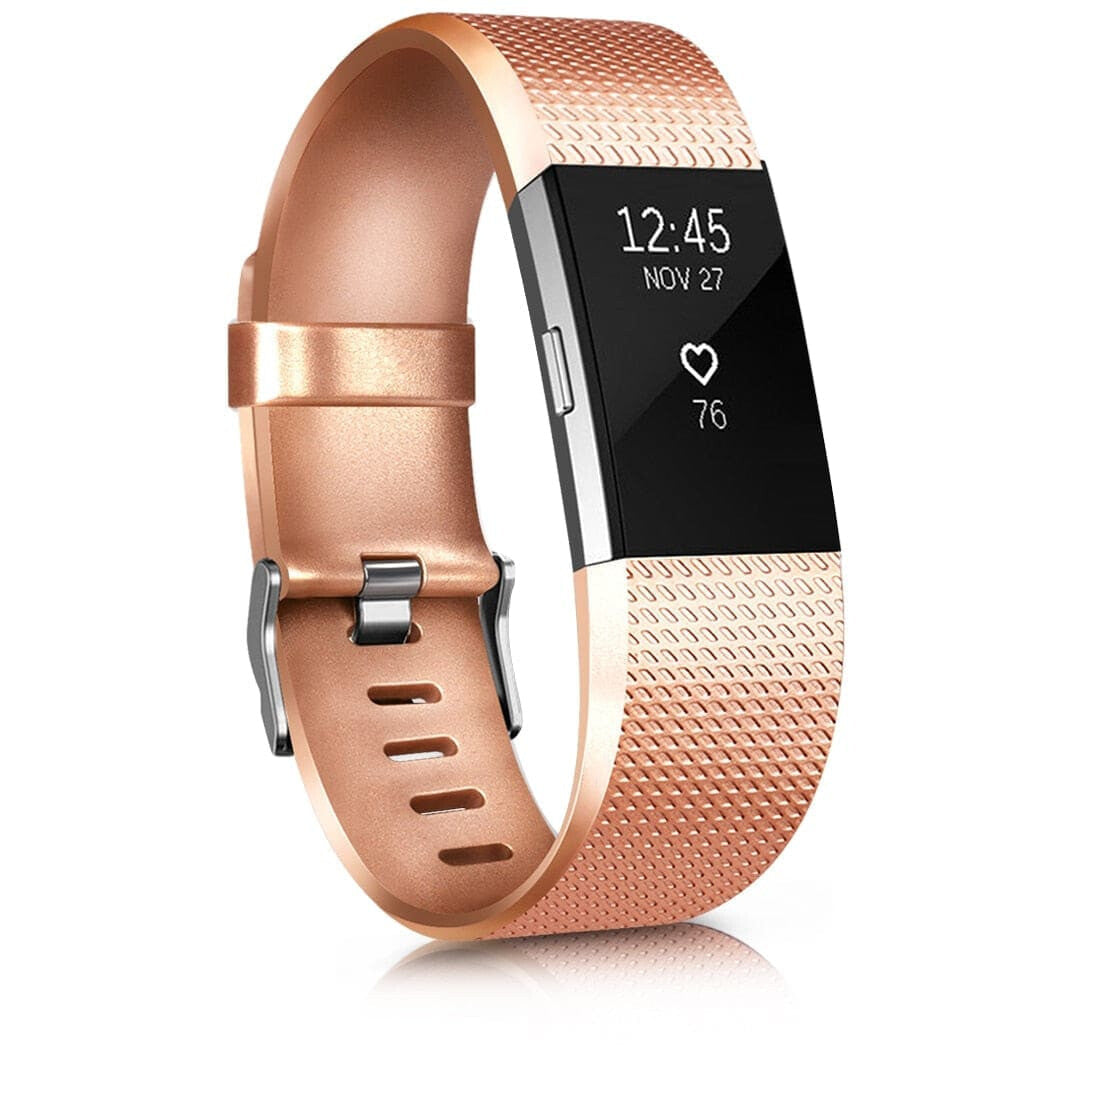 Silikon Armband für Fitbit Charge 2 - Rosegold / S - Fitbit Armband